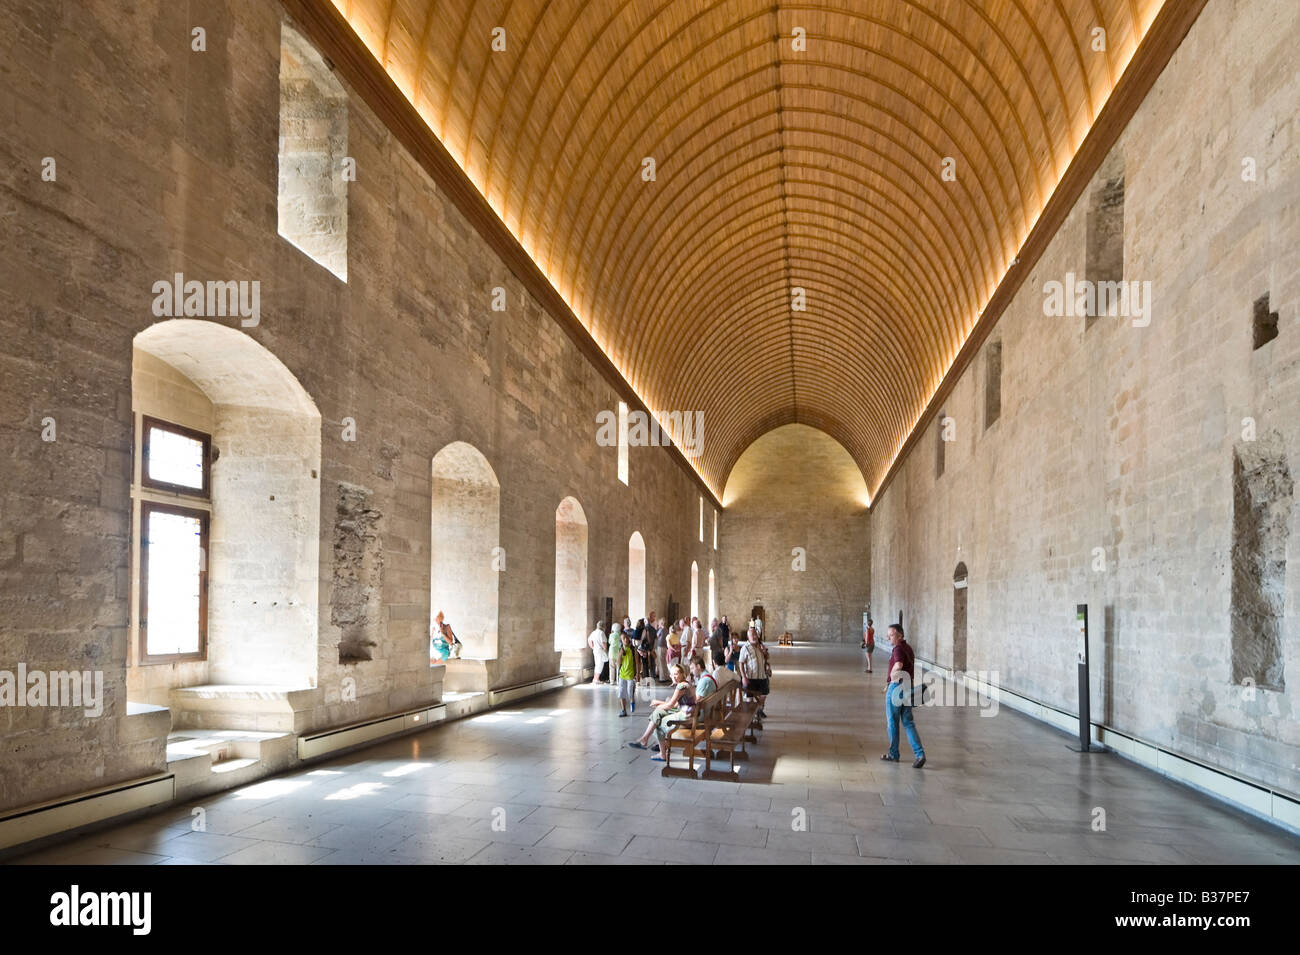 Grand Tinel Bankettsaal in the Old Palace, Palais des Papes, Avignon, Provence, Frankreich Stockfoto